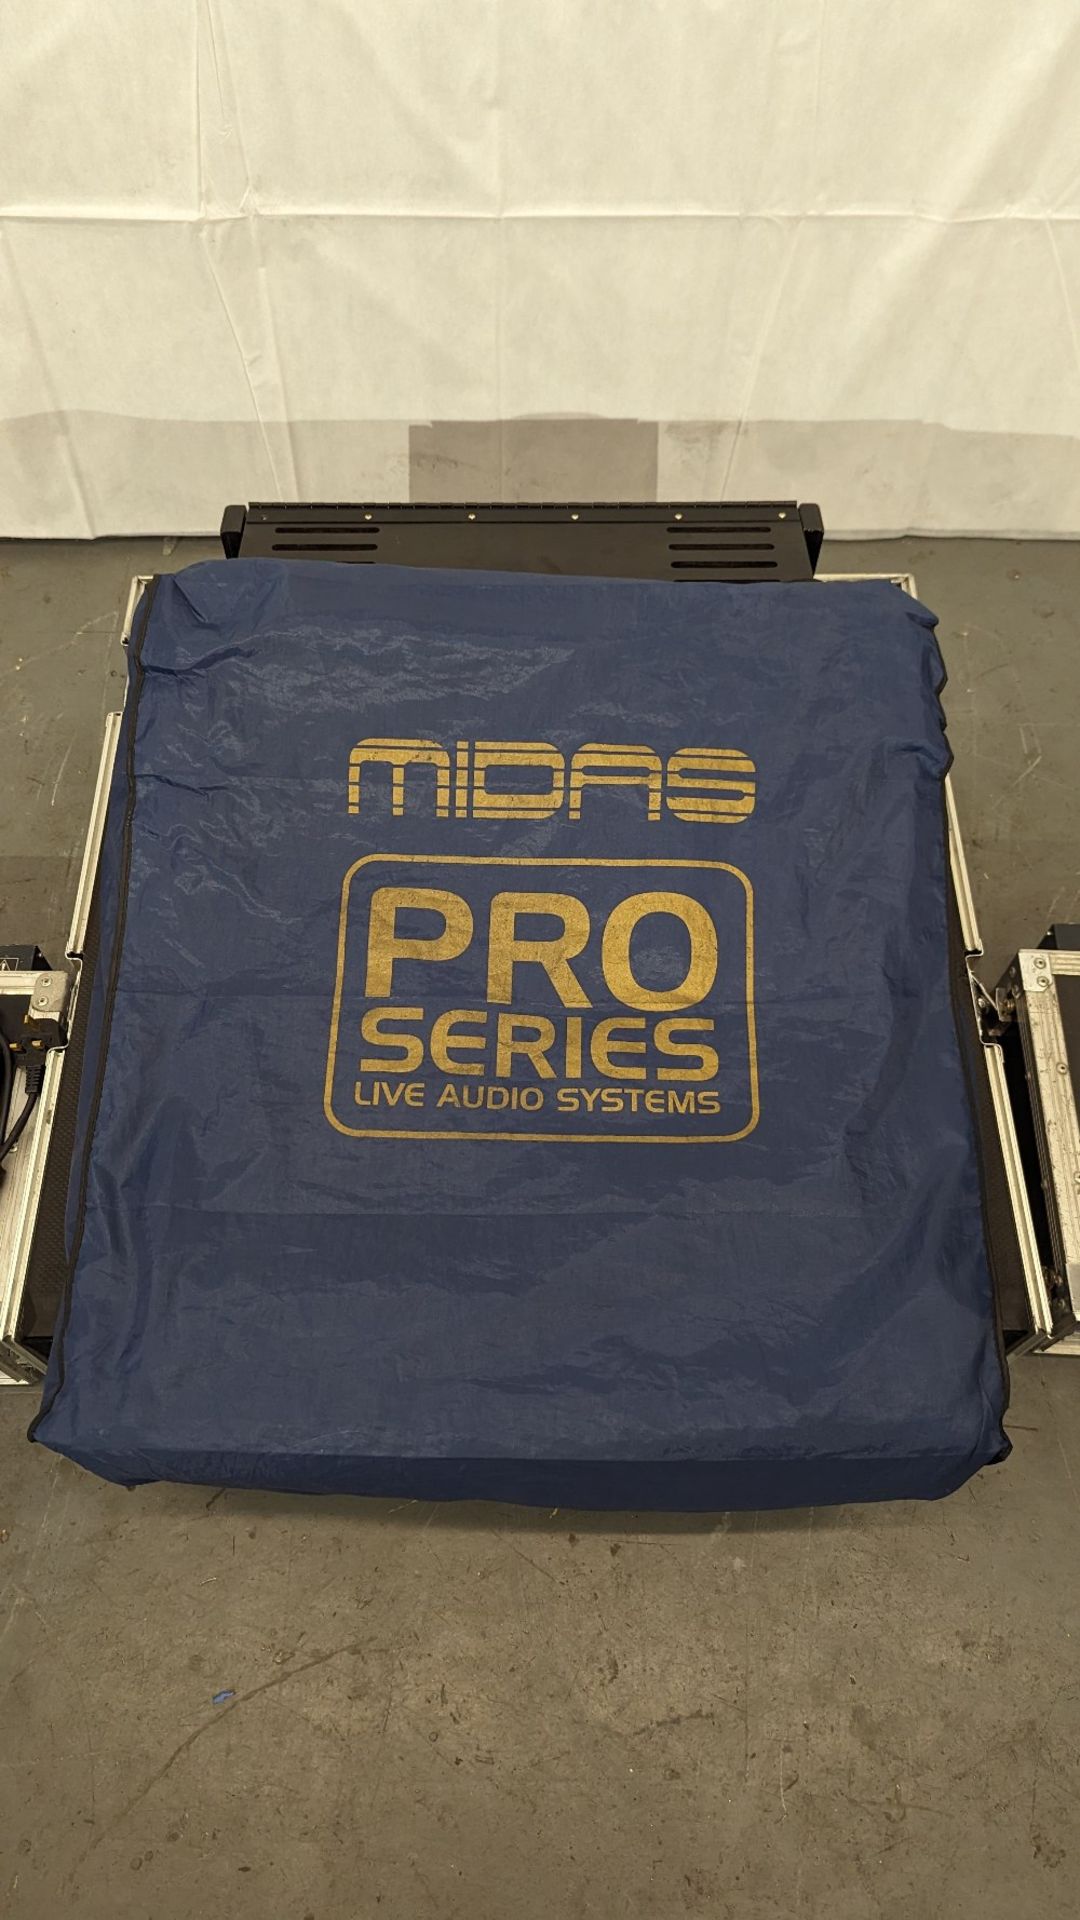 Midas Pro 1 Live Audio System Mixing Desk Console & Midas DL153 + DL151 Digital Stage Boxes - Image 10 of 12